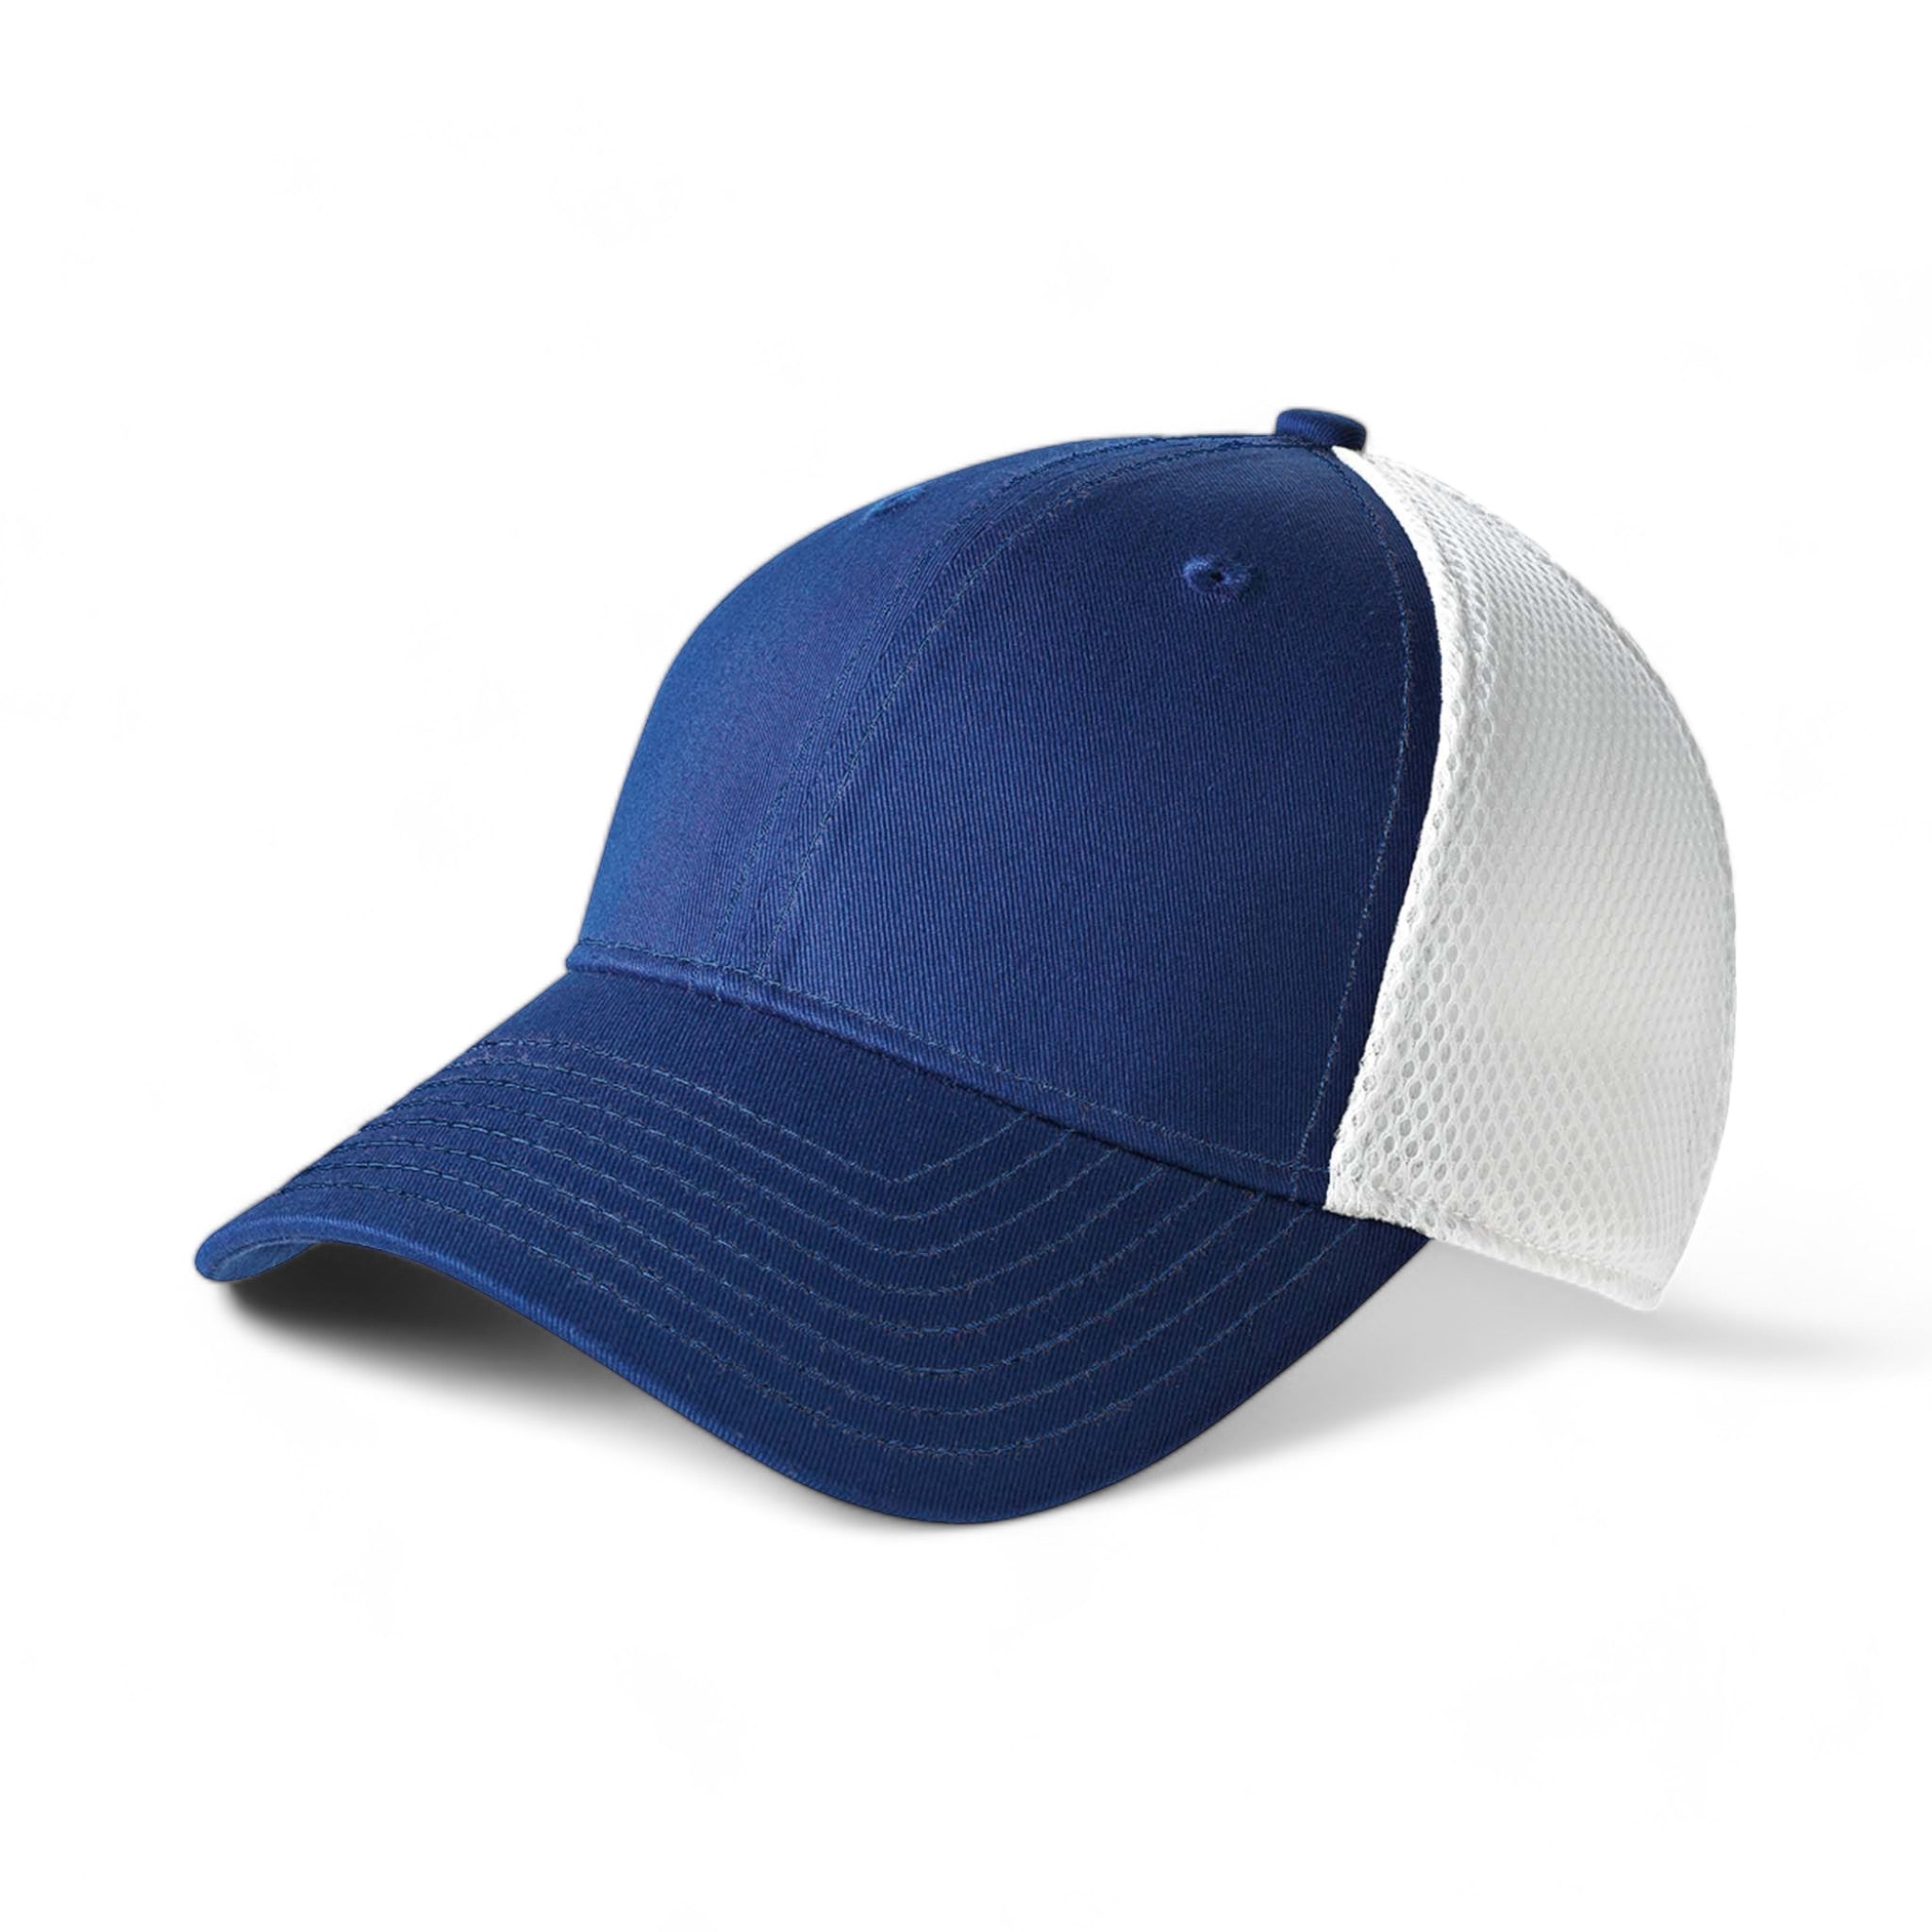 Side view of New Era NE1020 custom hat in royal and white